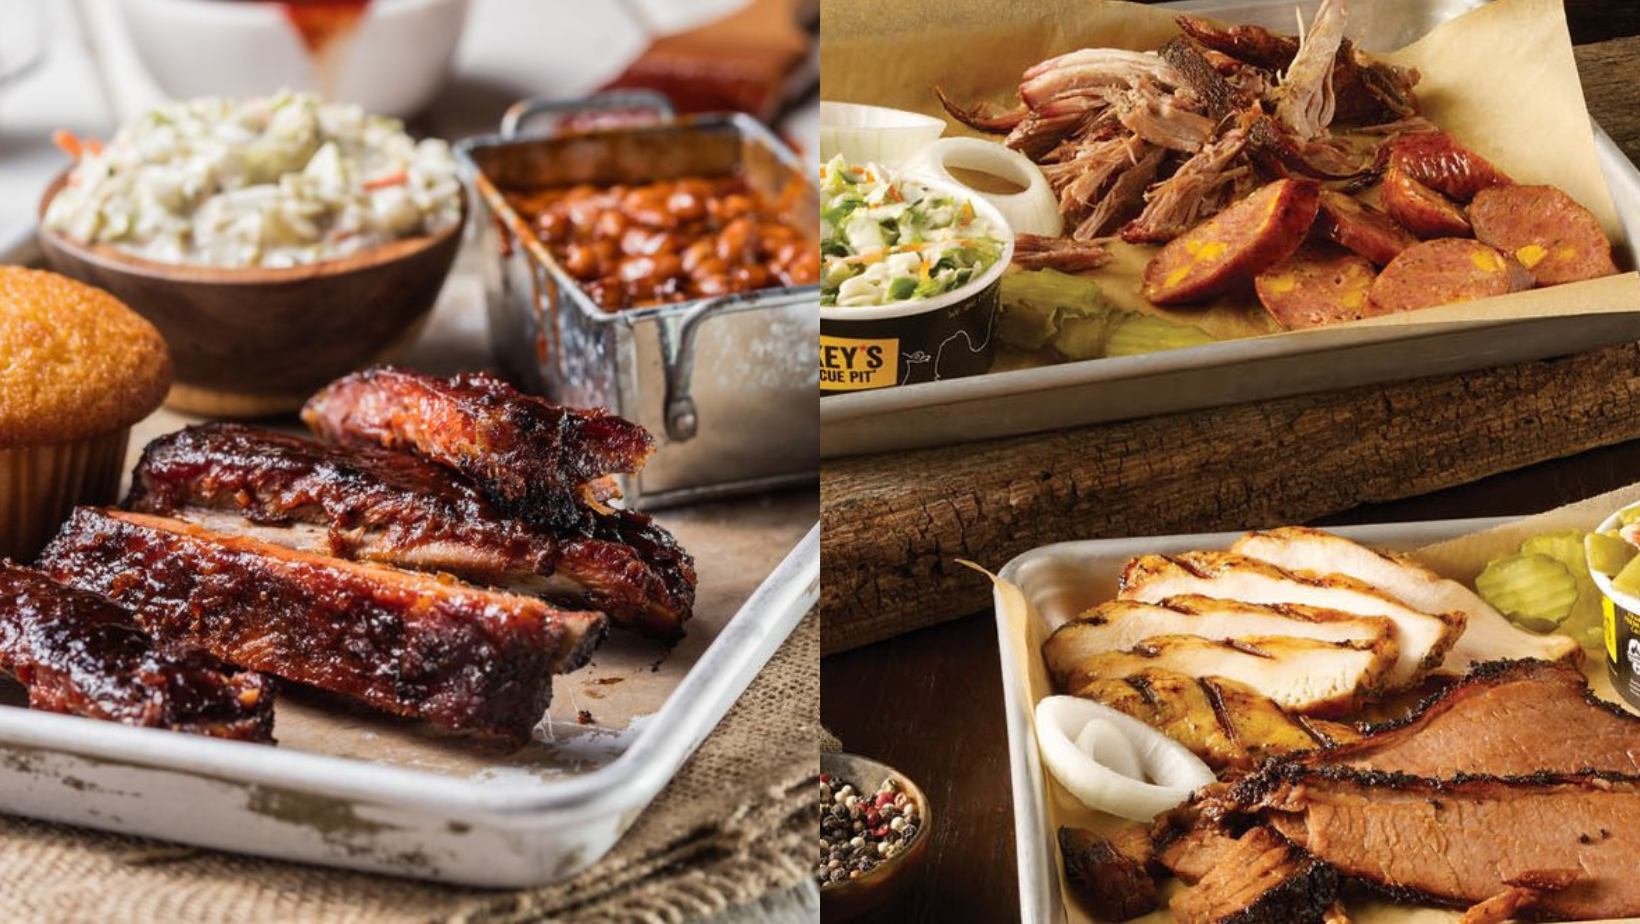 If You Haven't Already Tried These American Barbecue Chains, You Need to Get to One ASAP